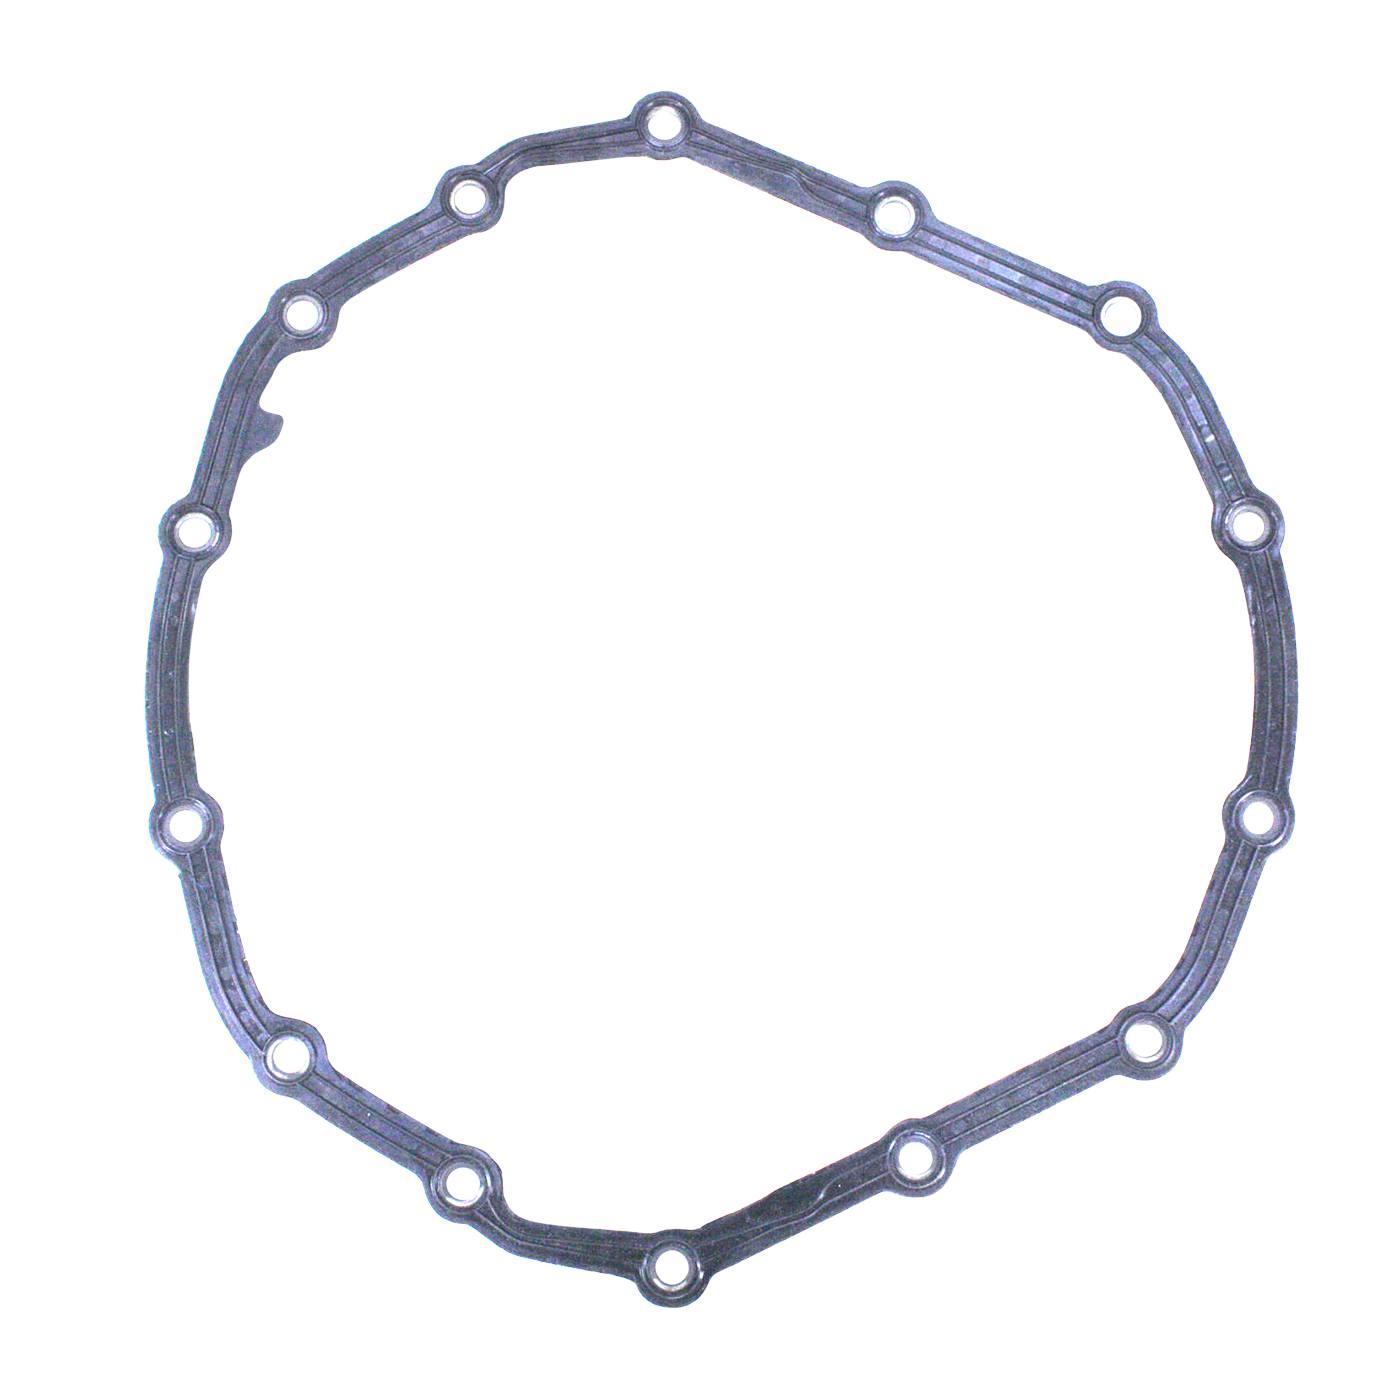 Yukon GM & Dodge 11.5" Rear Differential Cover Gasket, Rubber 